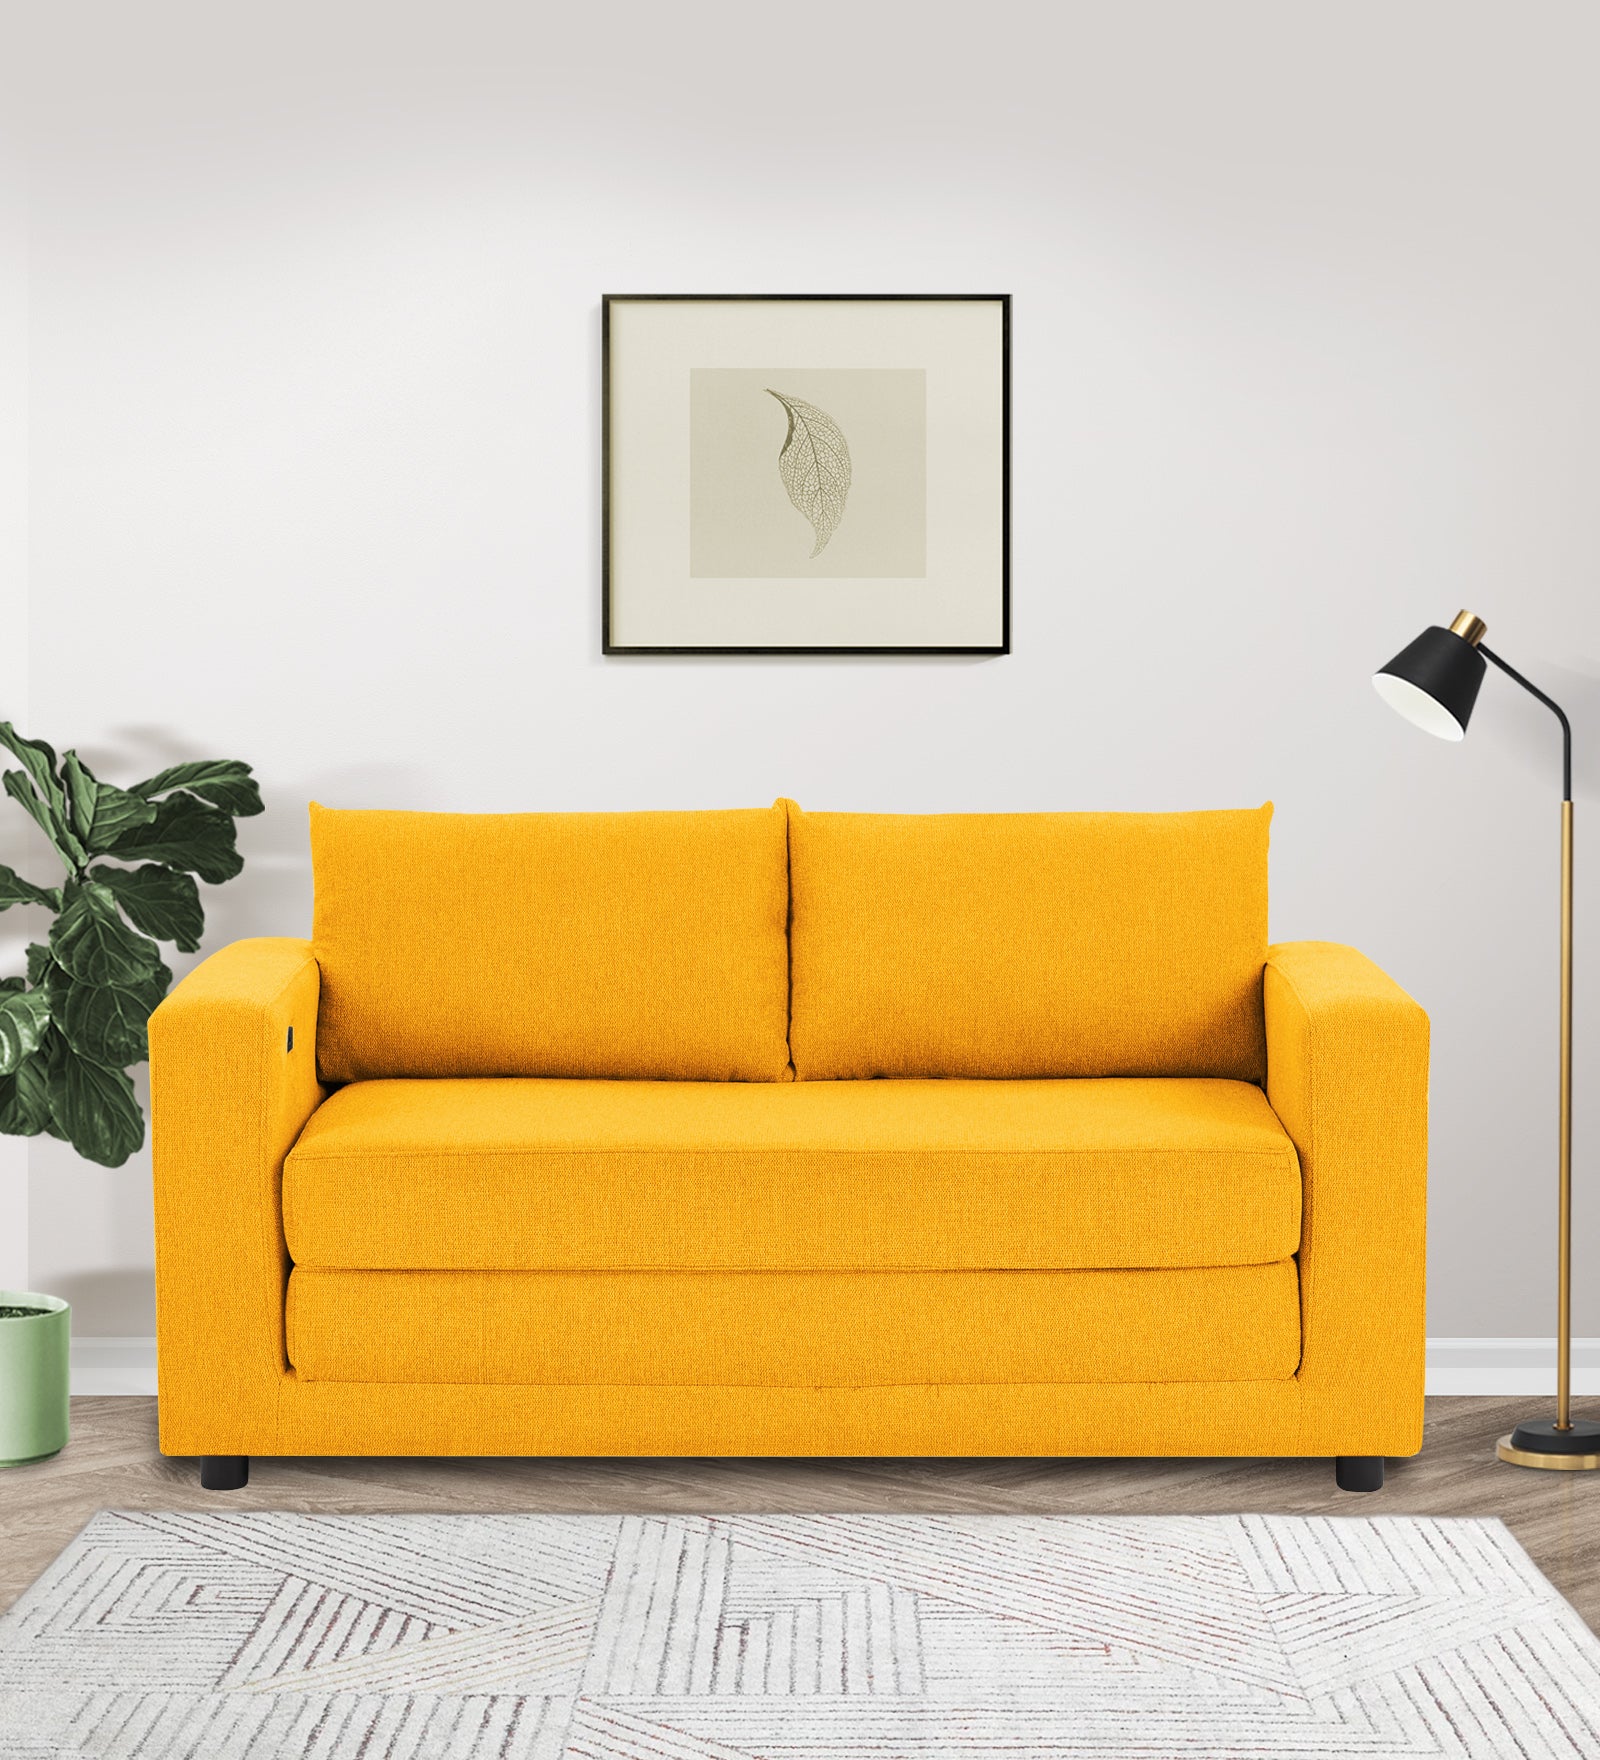 Roman Fabric 3 Seater Convertable Sofa Cum Bed in Bold Yellow Colour With Portable